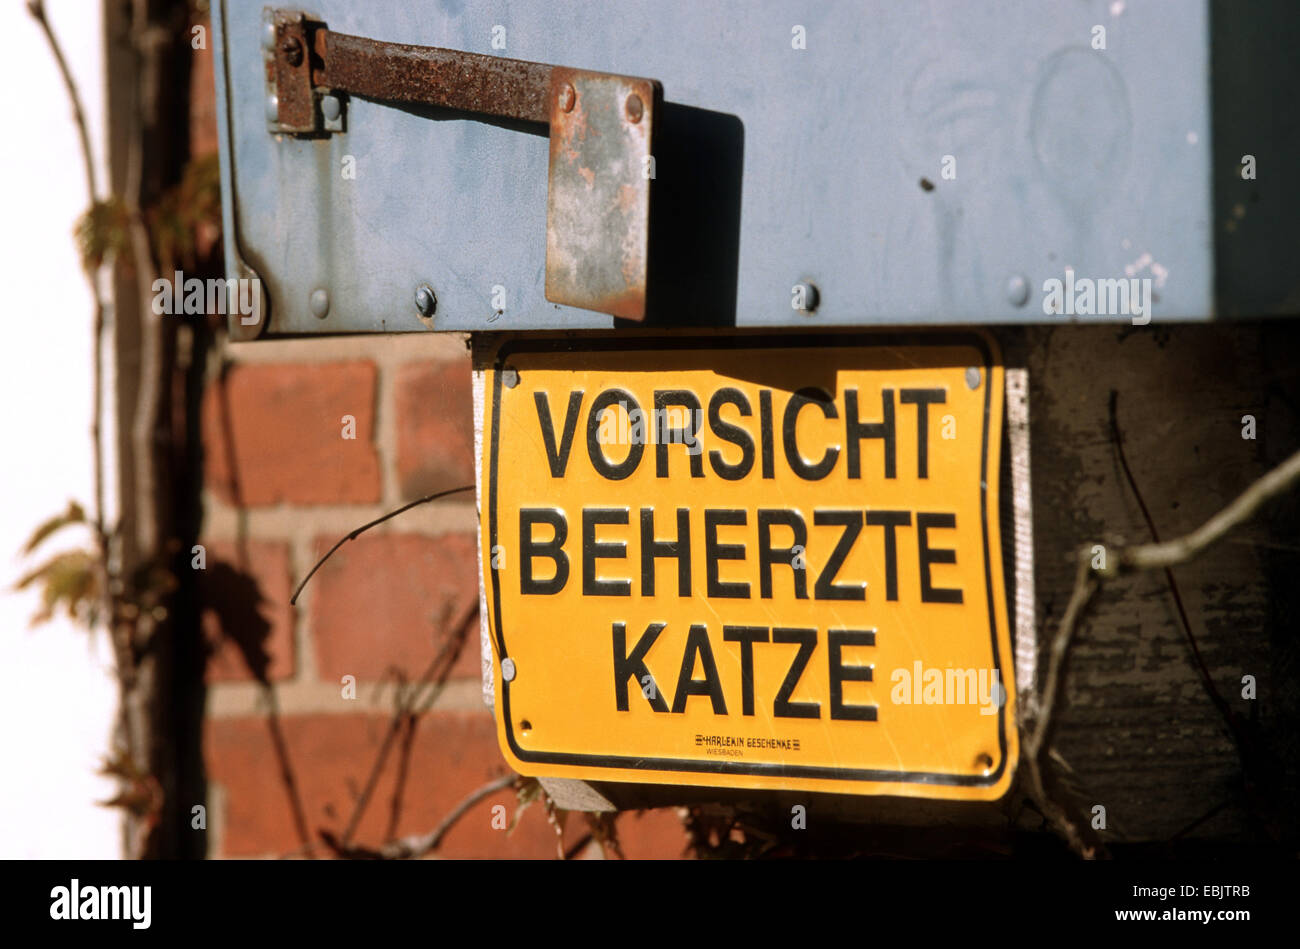 sign saying 'Vorsicht beherzte Katze' ('attention, courageous cat') at the entrance of a property Stock Photo